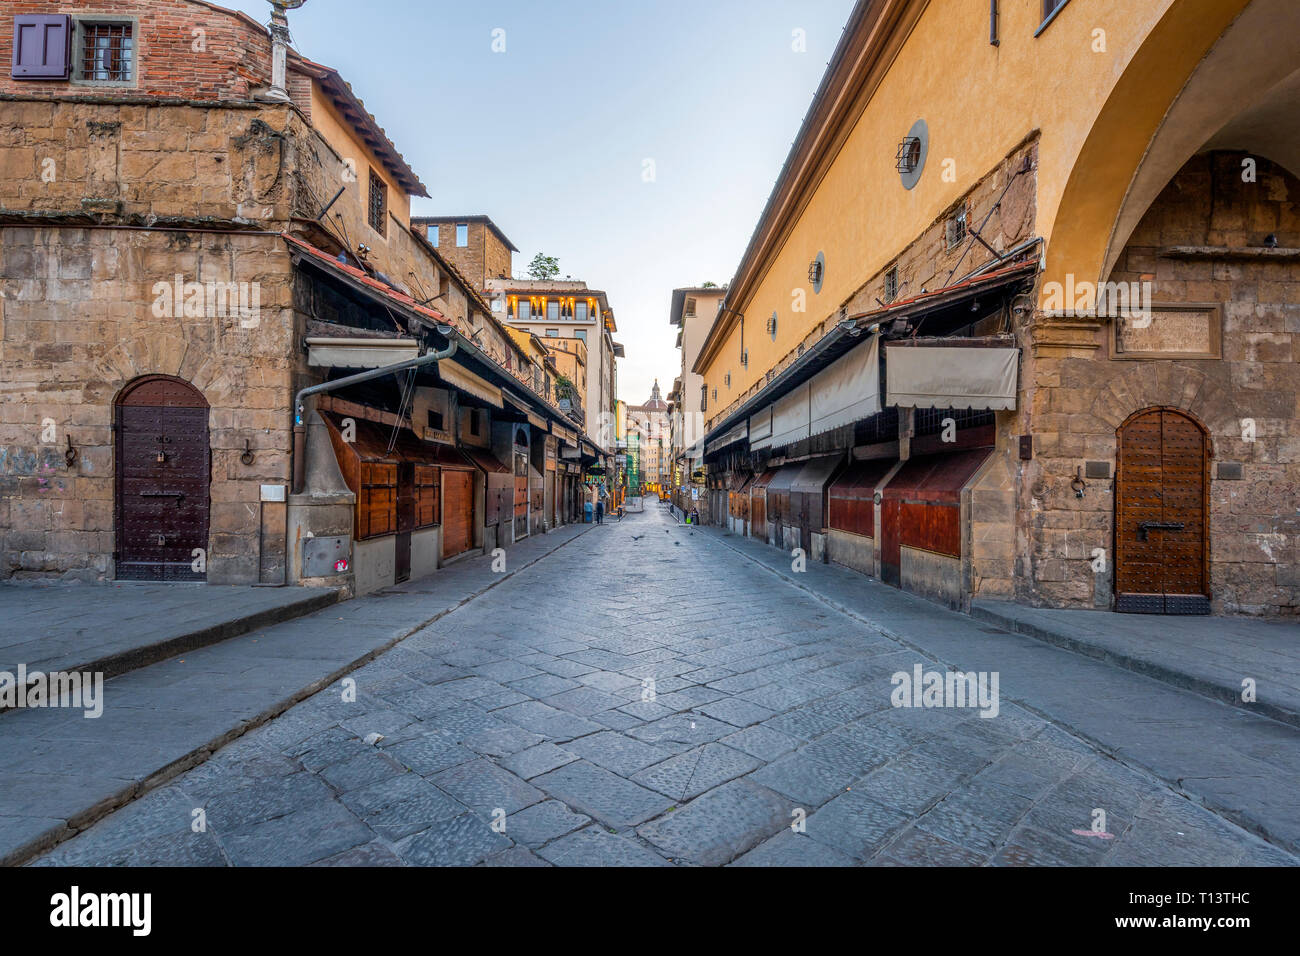 Italy, Tuscany, Florence, Old town, alley Stock Photo